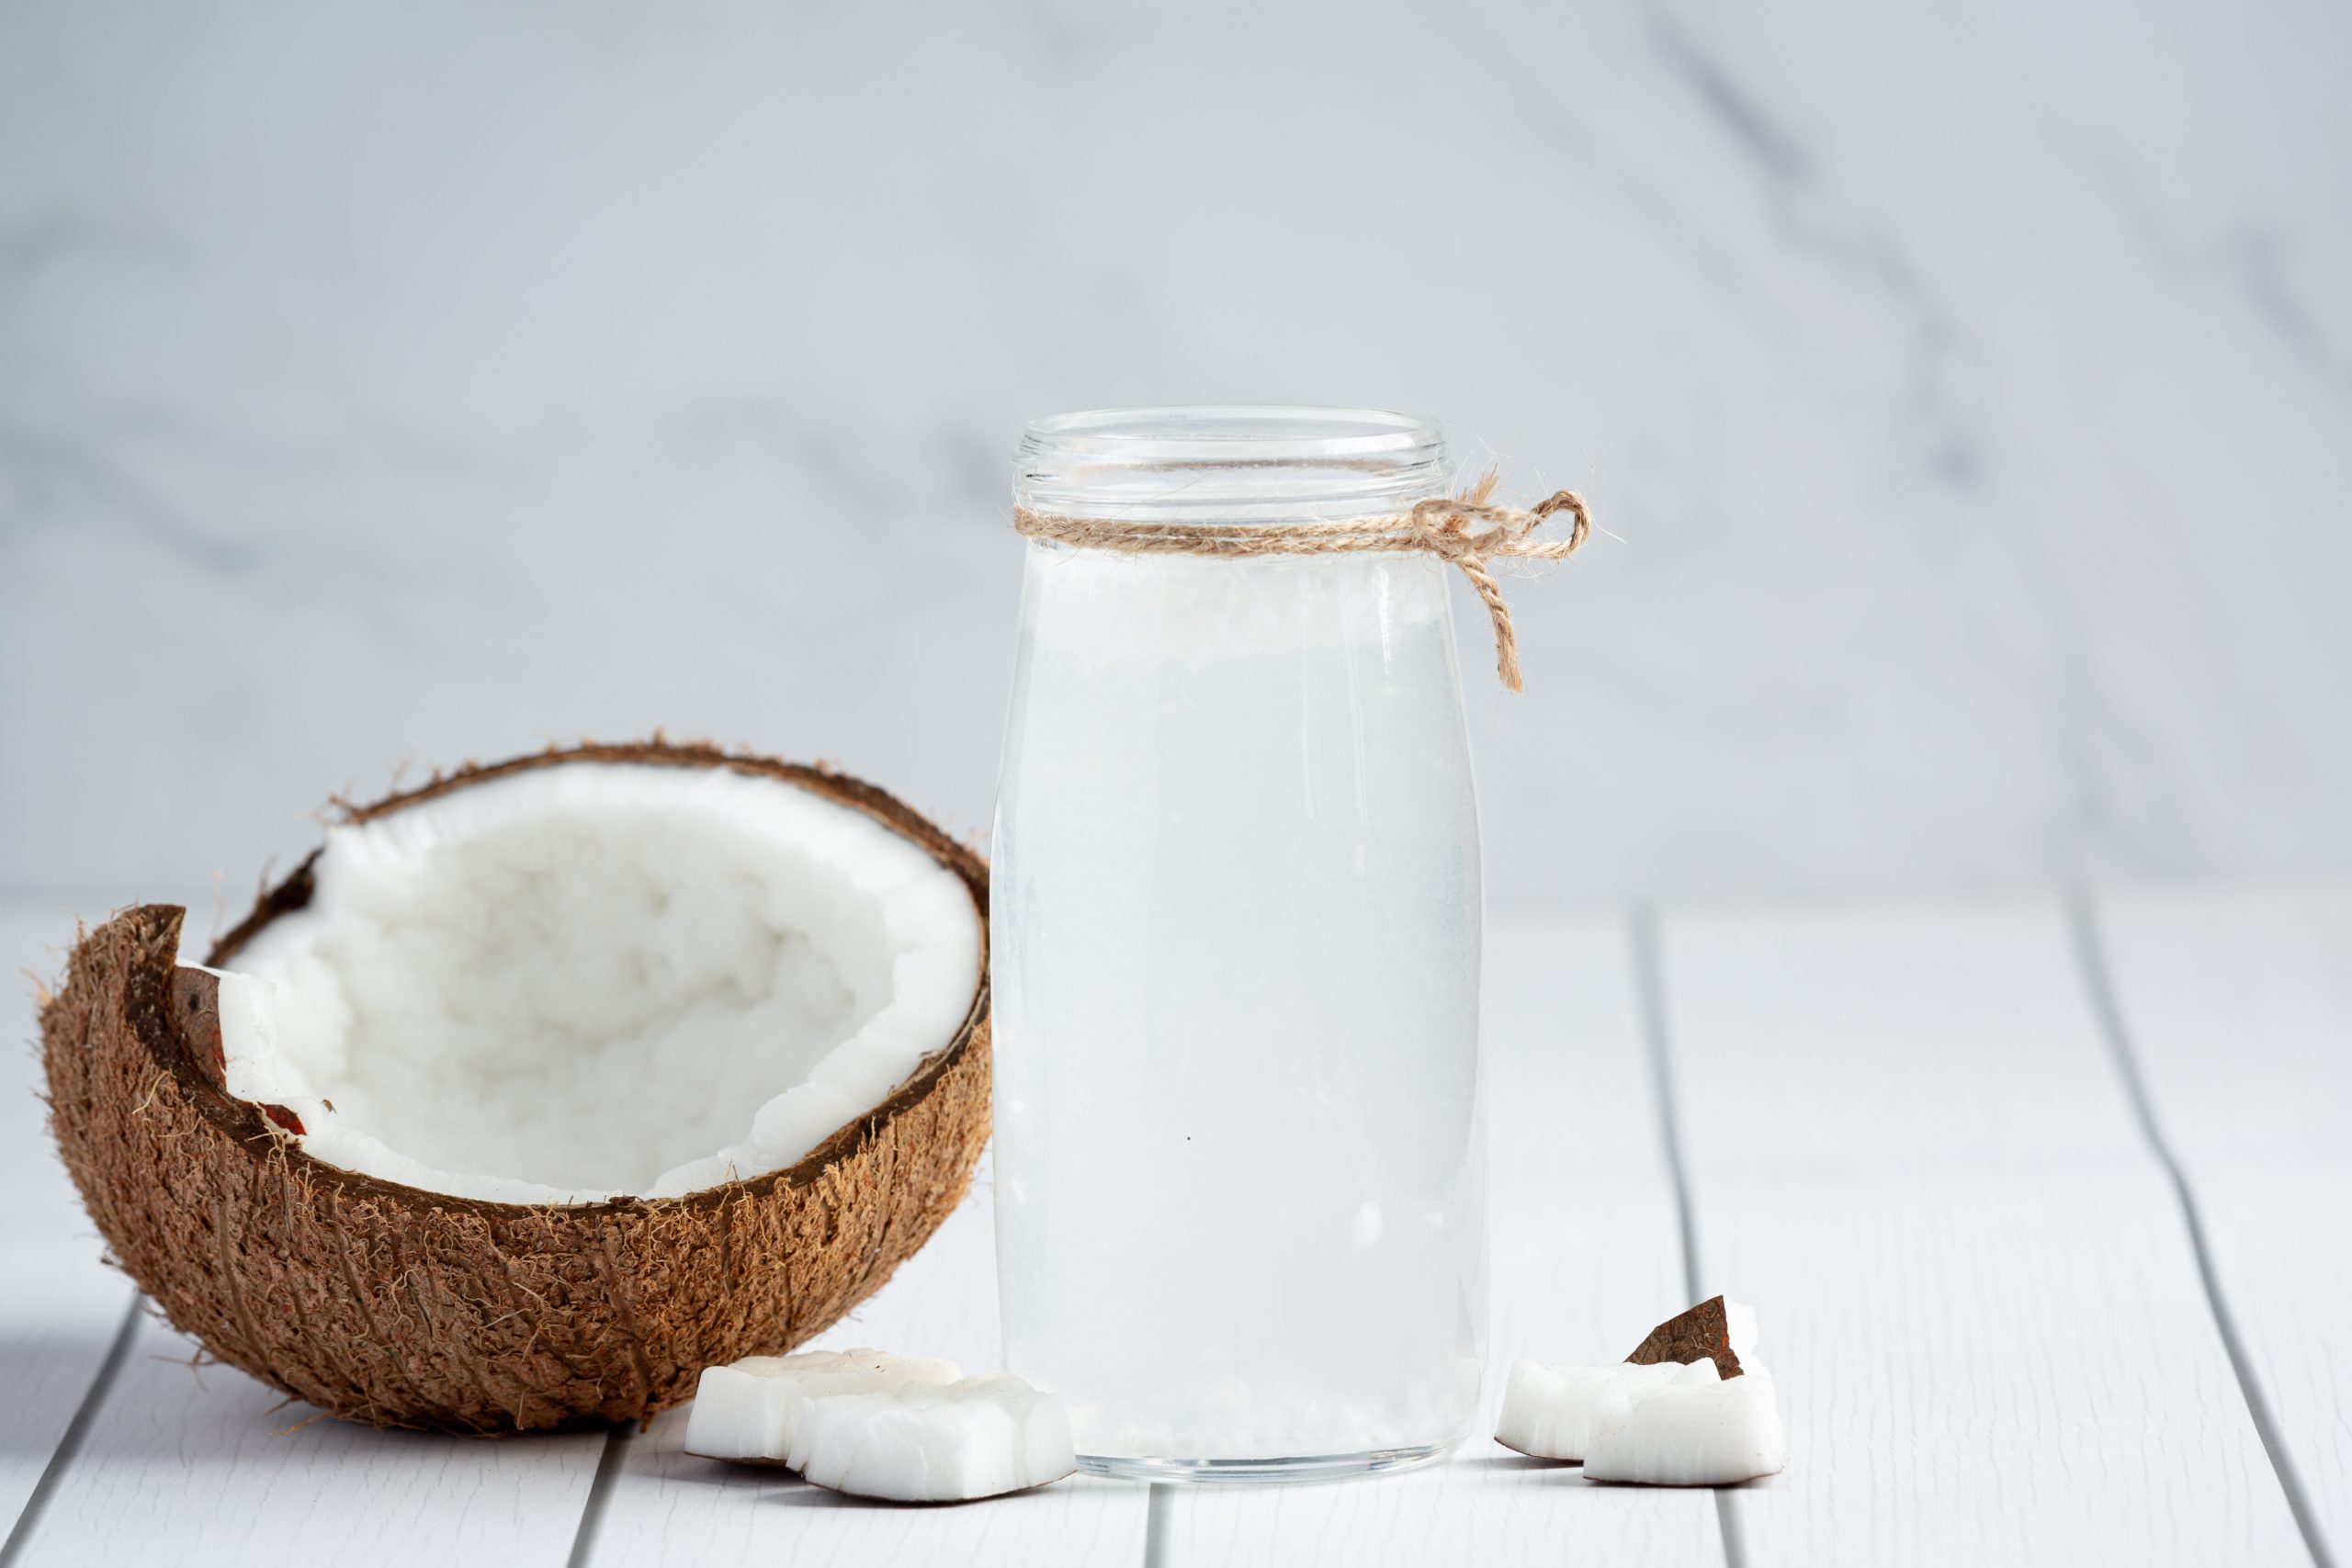 glass-coconut-water-put-white-wooden-background (1)